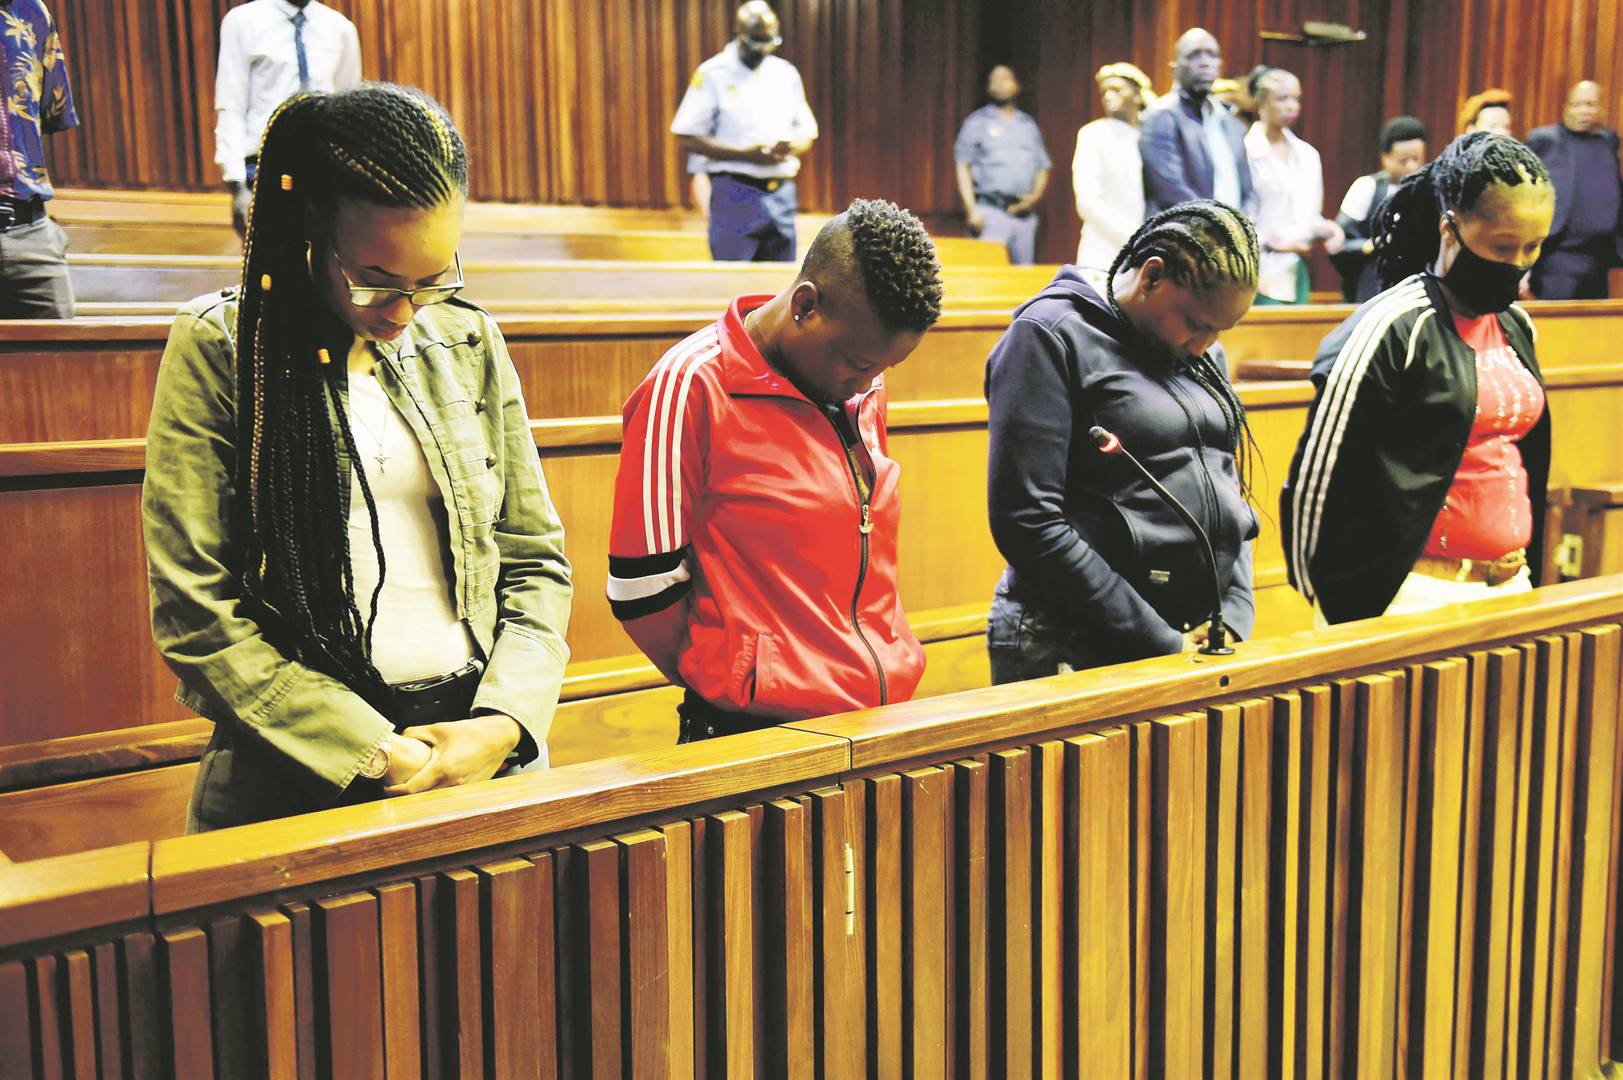 LOOKING DOWN IN SHAME: Tshegofatso Moremane, Gontse Thloele, Margaret Koaile and Portia Mmola are charged in connection with the murder of Prince Lethukuthula Zulu, as well as for theft.            Photo by Christopher Moagi